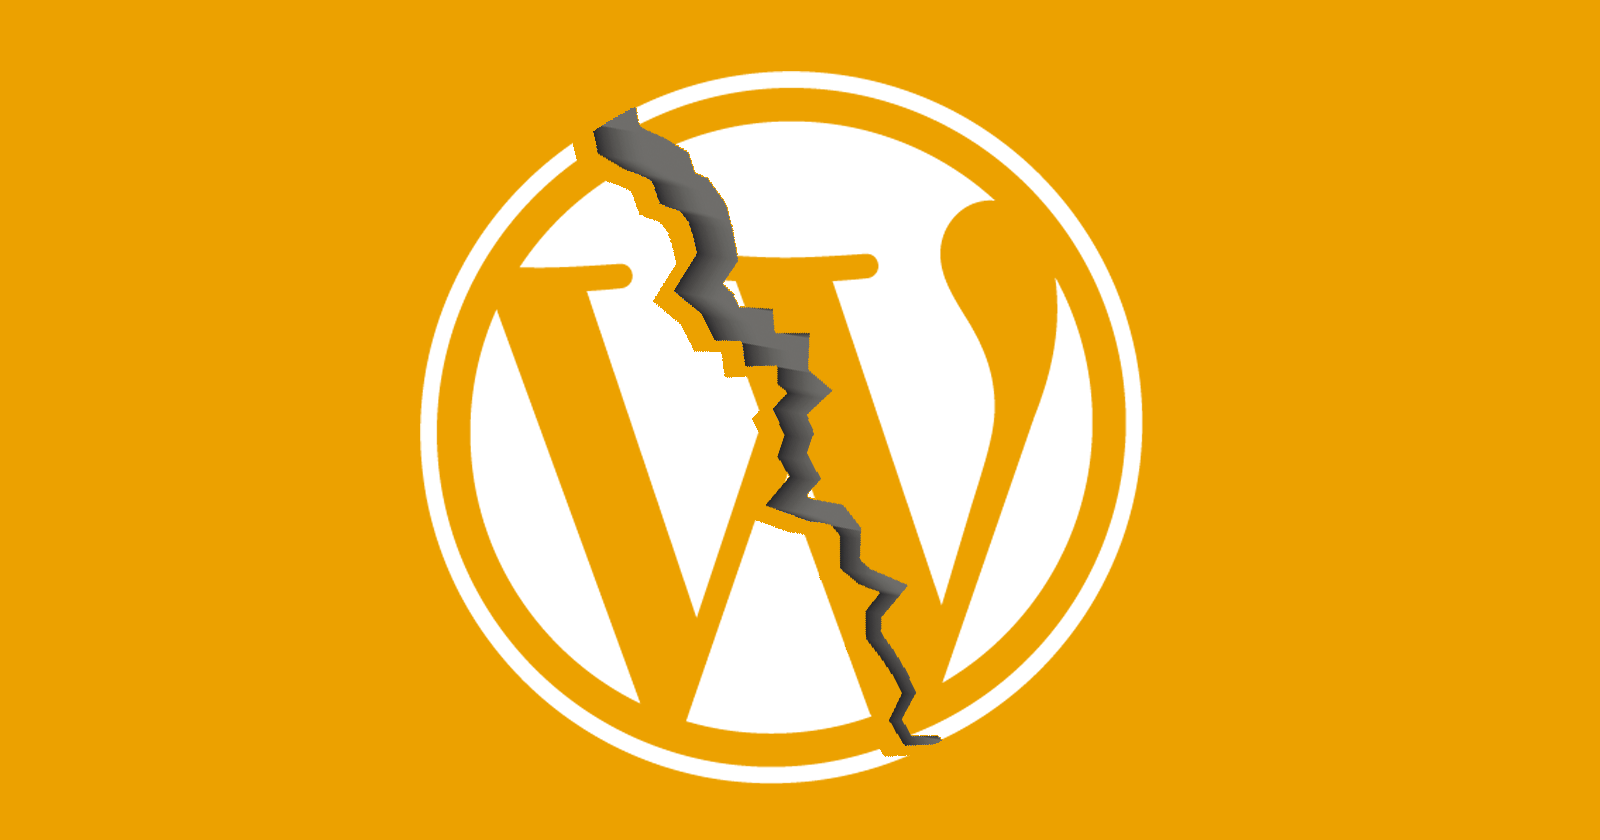 Image of the WordPress logo with a crack in it